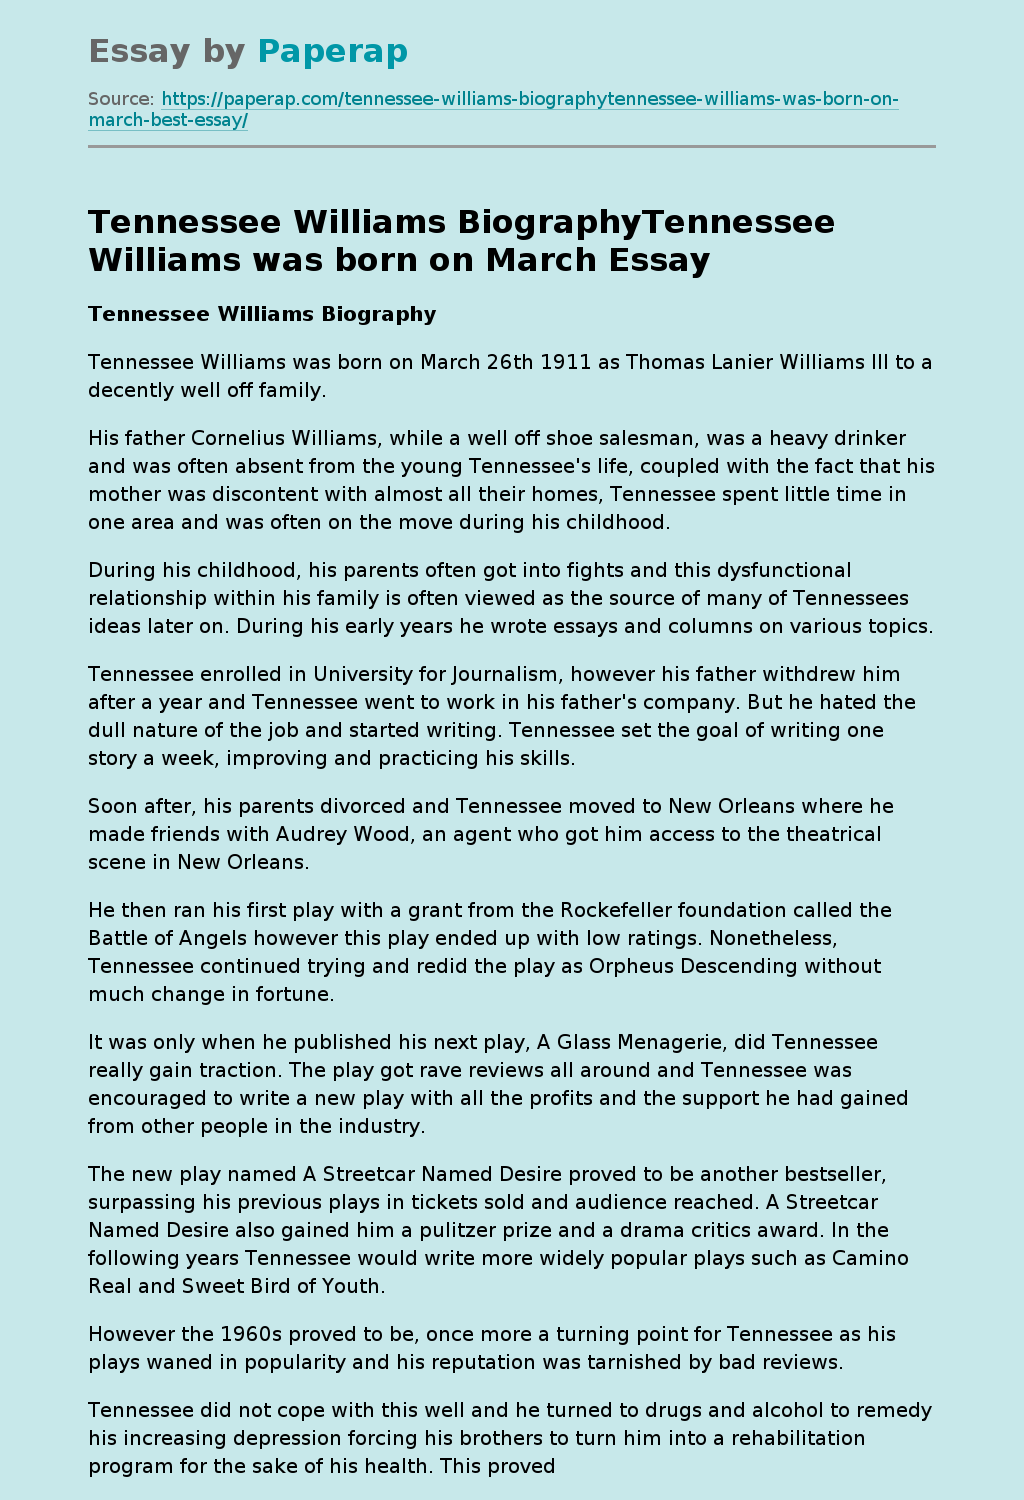 Tennessee Williams BiographyTennessee Williams was born on March